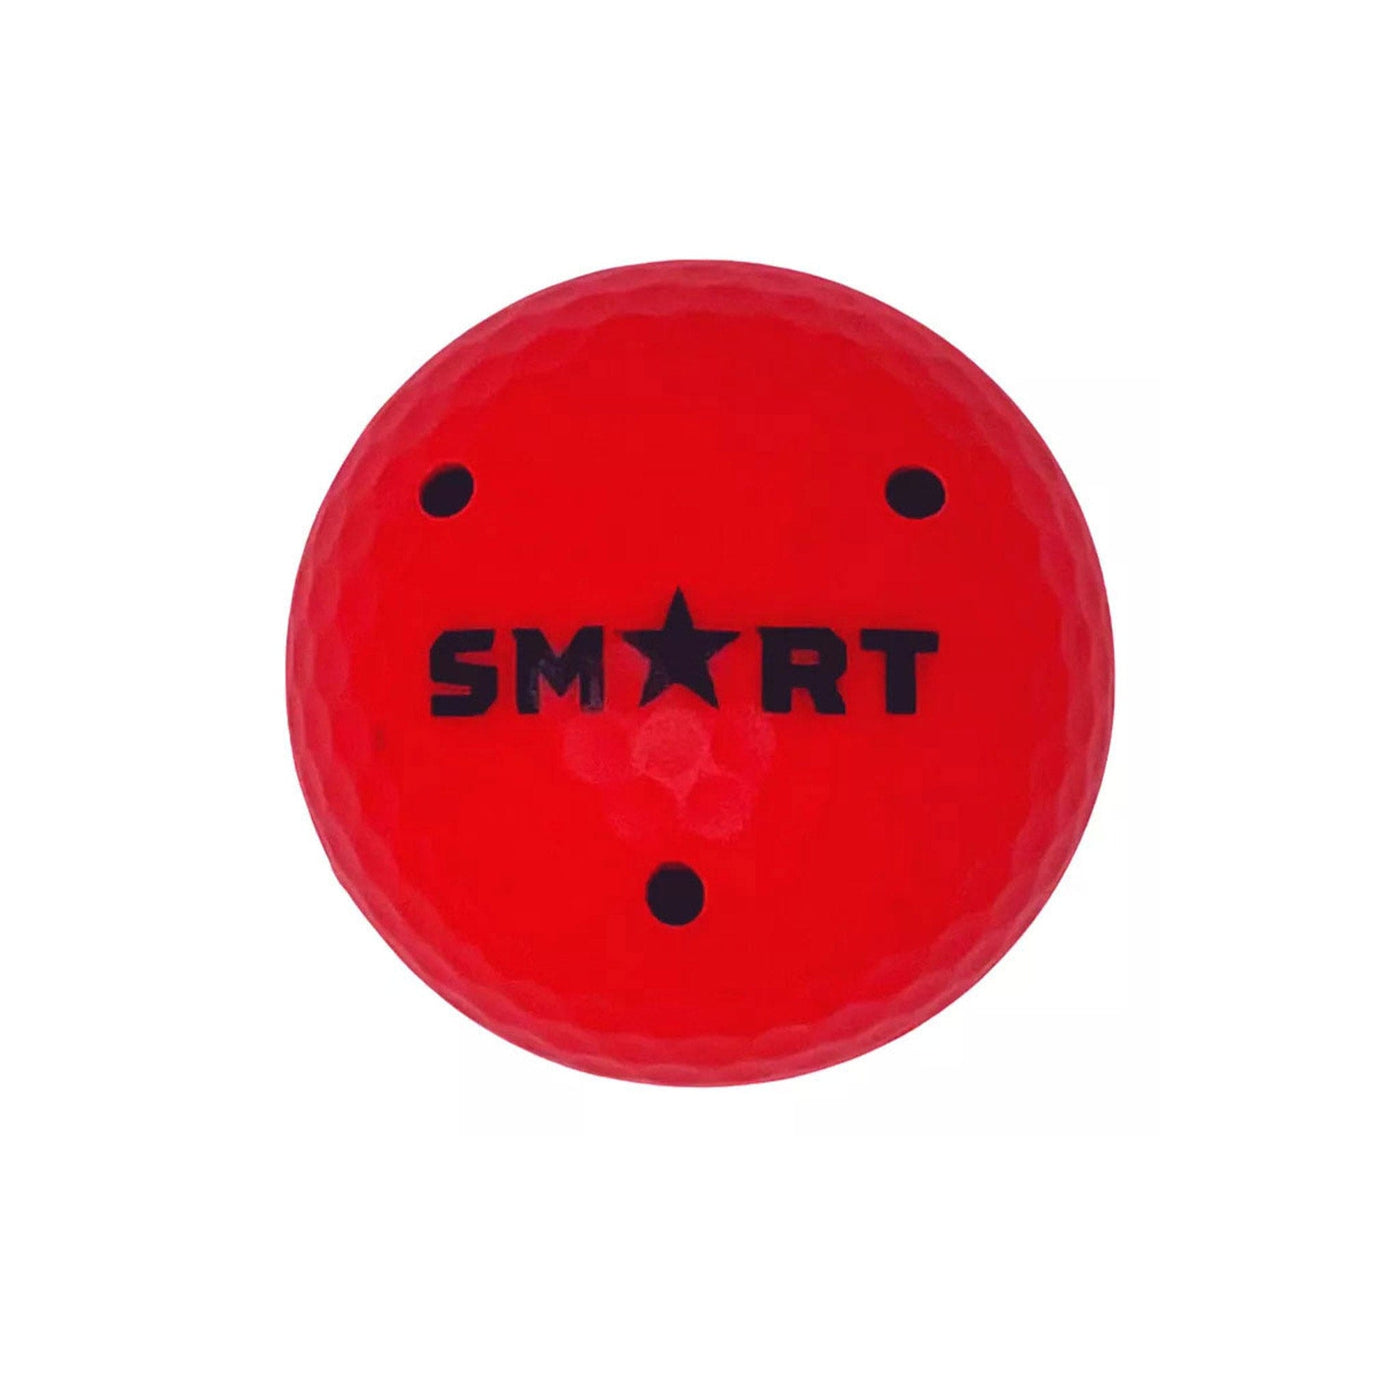 Small ball weighing 8 ounces used for improving stickhandling and puck control skills. Stickhandling, training, puck handling, medicine ball, hard ball, training ball, weighted ball, skills.